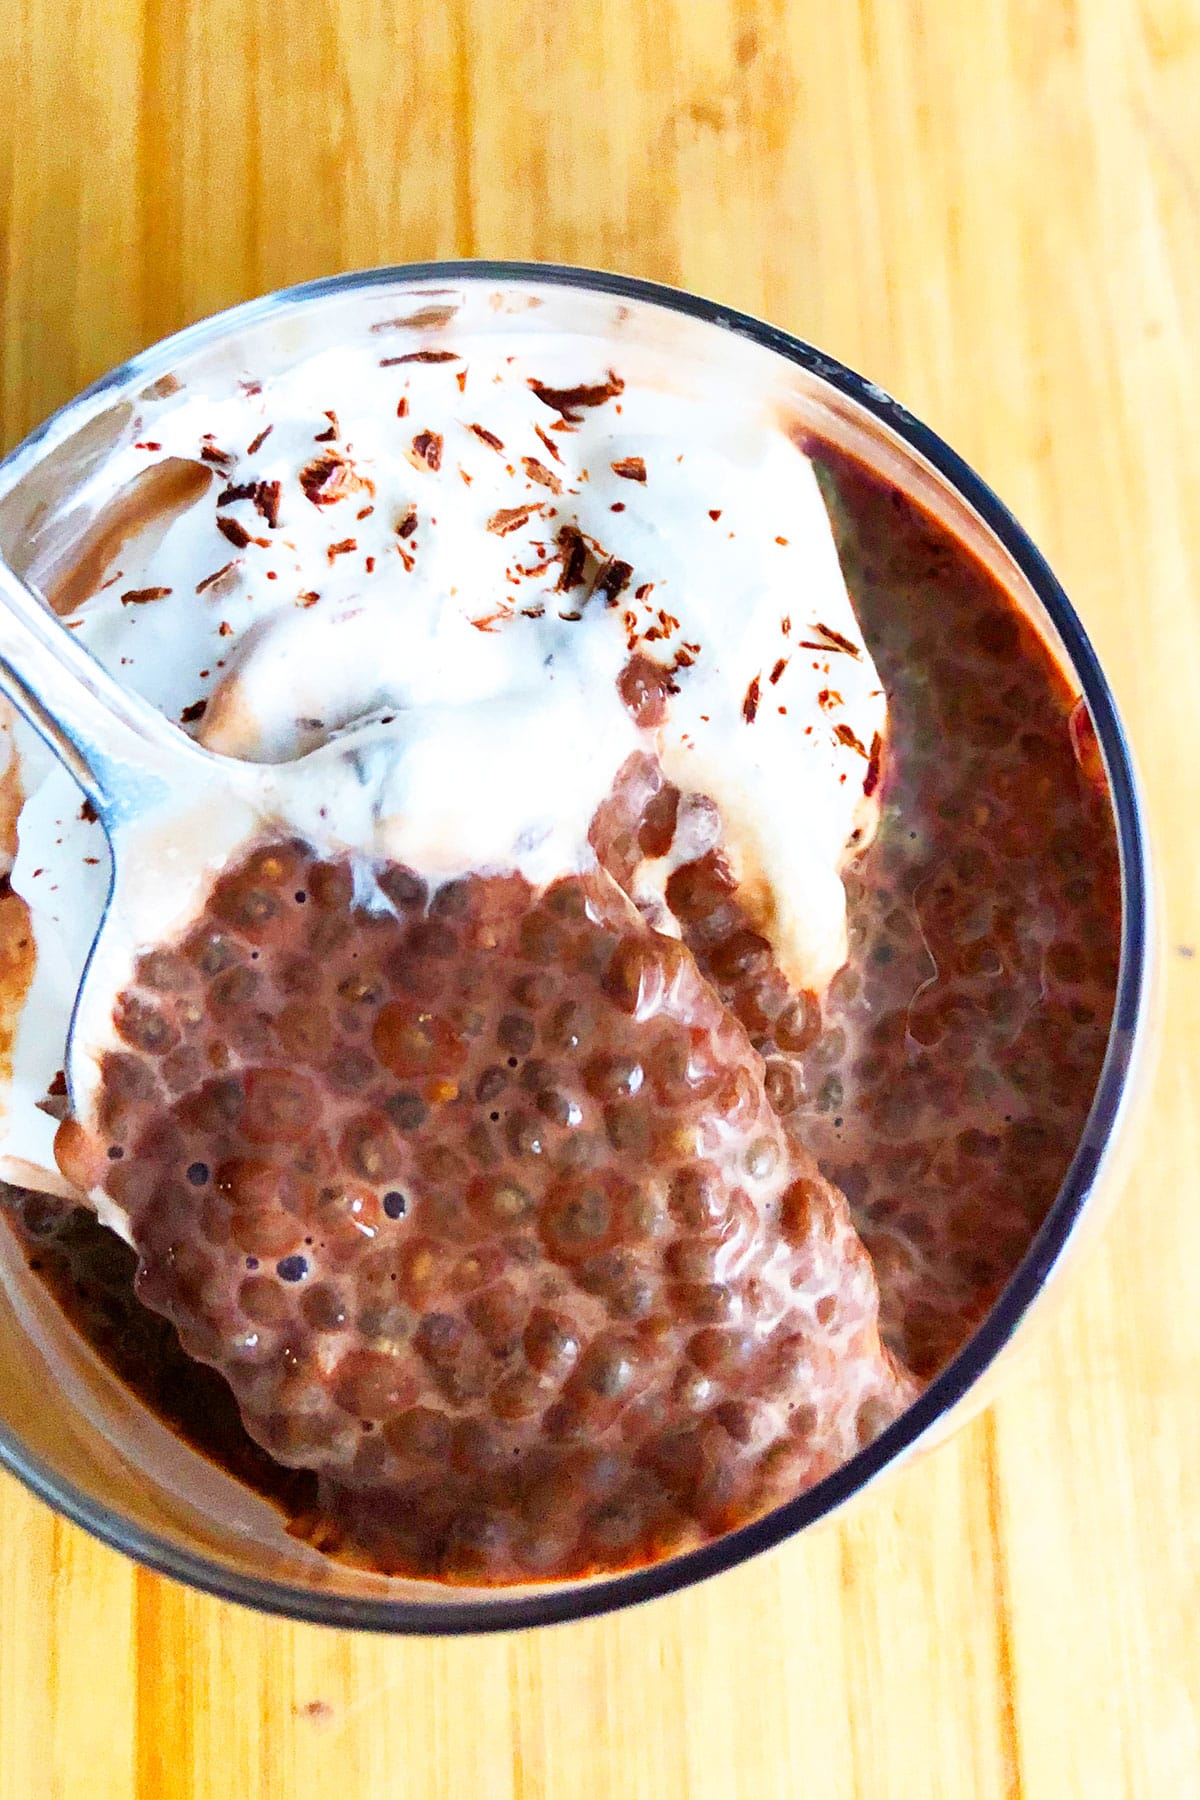 Spoonful of Healthy Chia Pudding With Cocoa Powder in Glass Cup- Closeup Shot. 